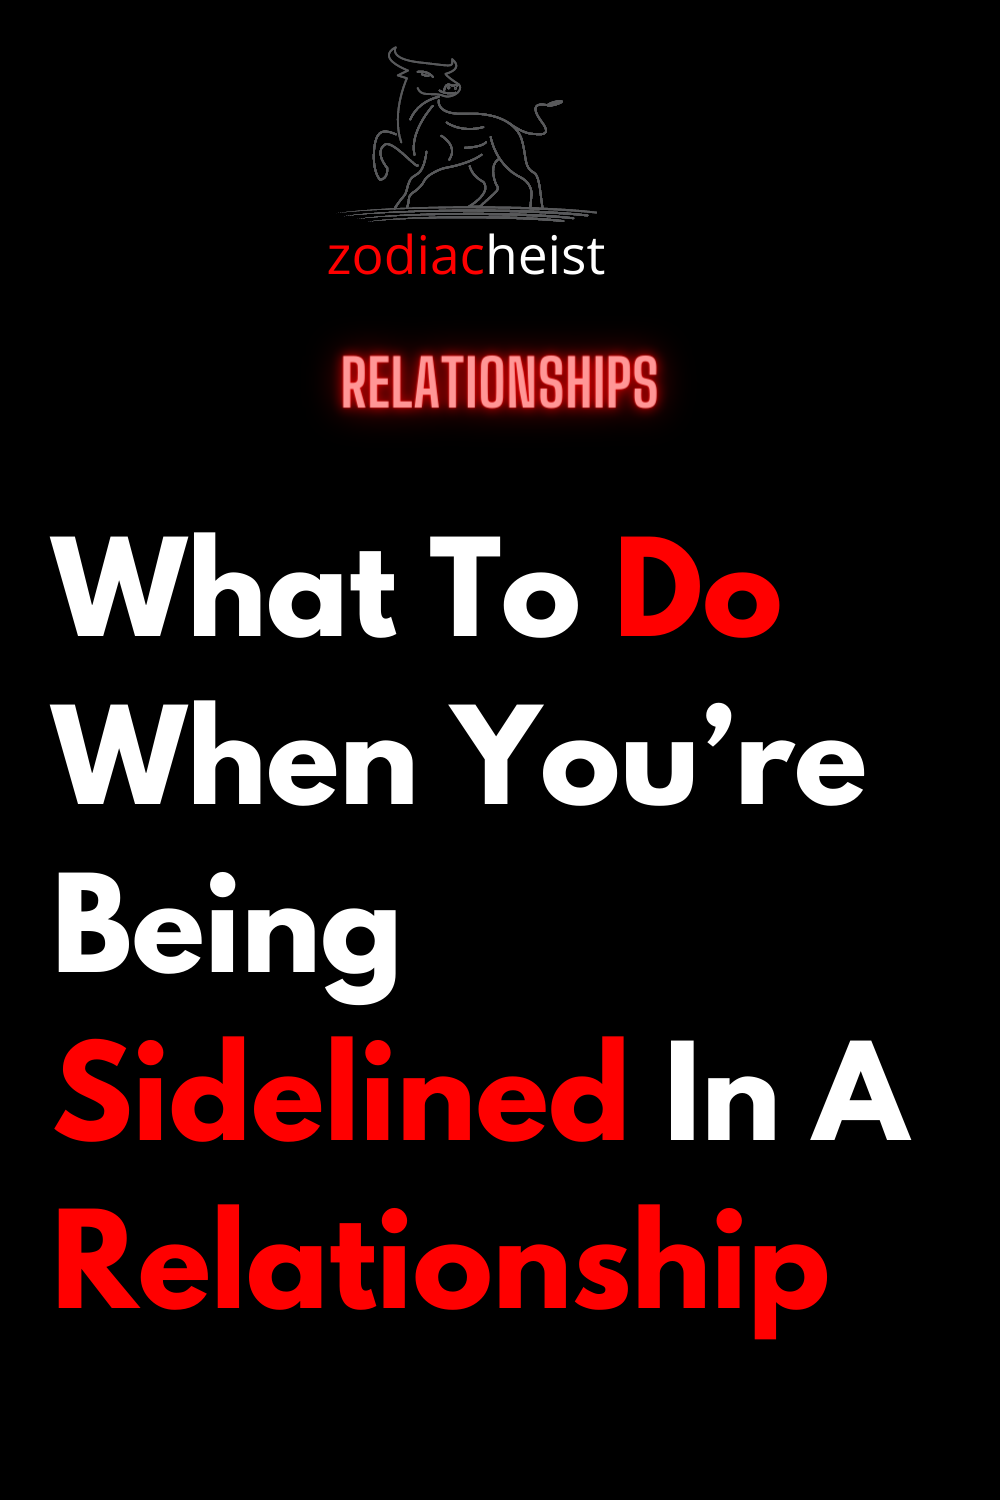 What To Do When You’re Being Sidelined In A Relationship